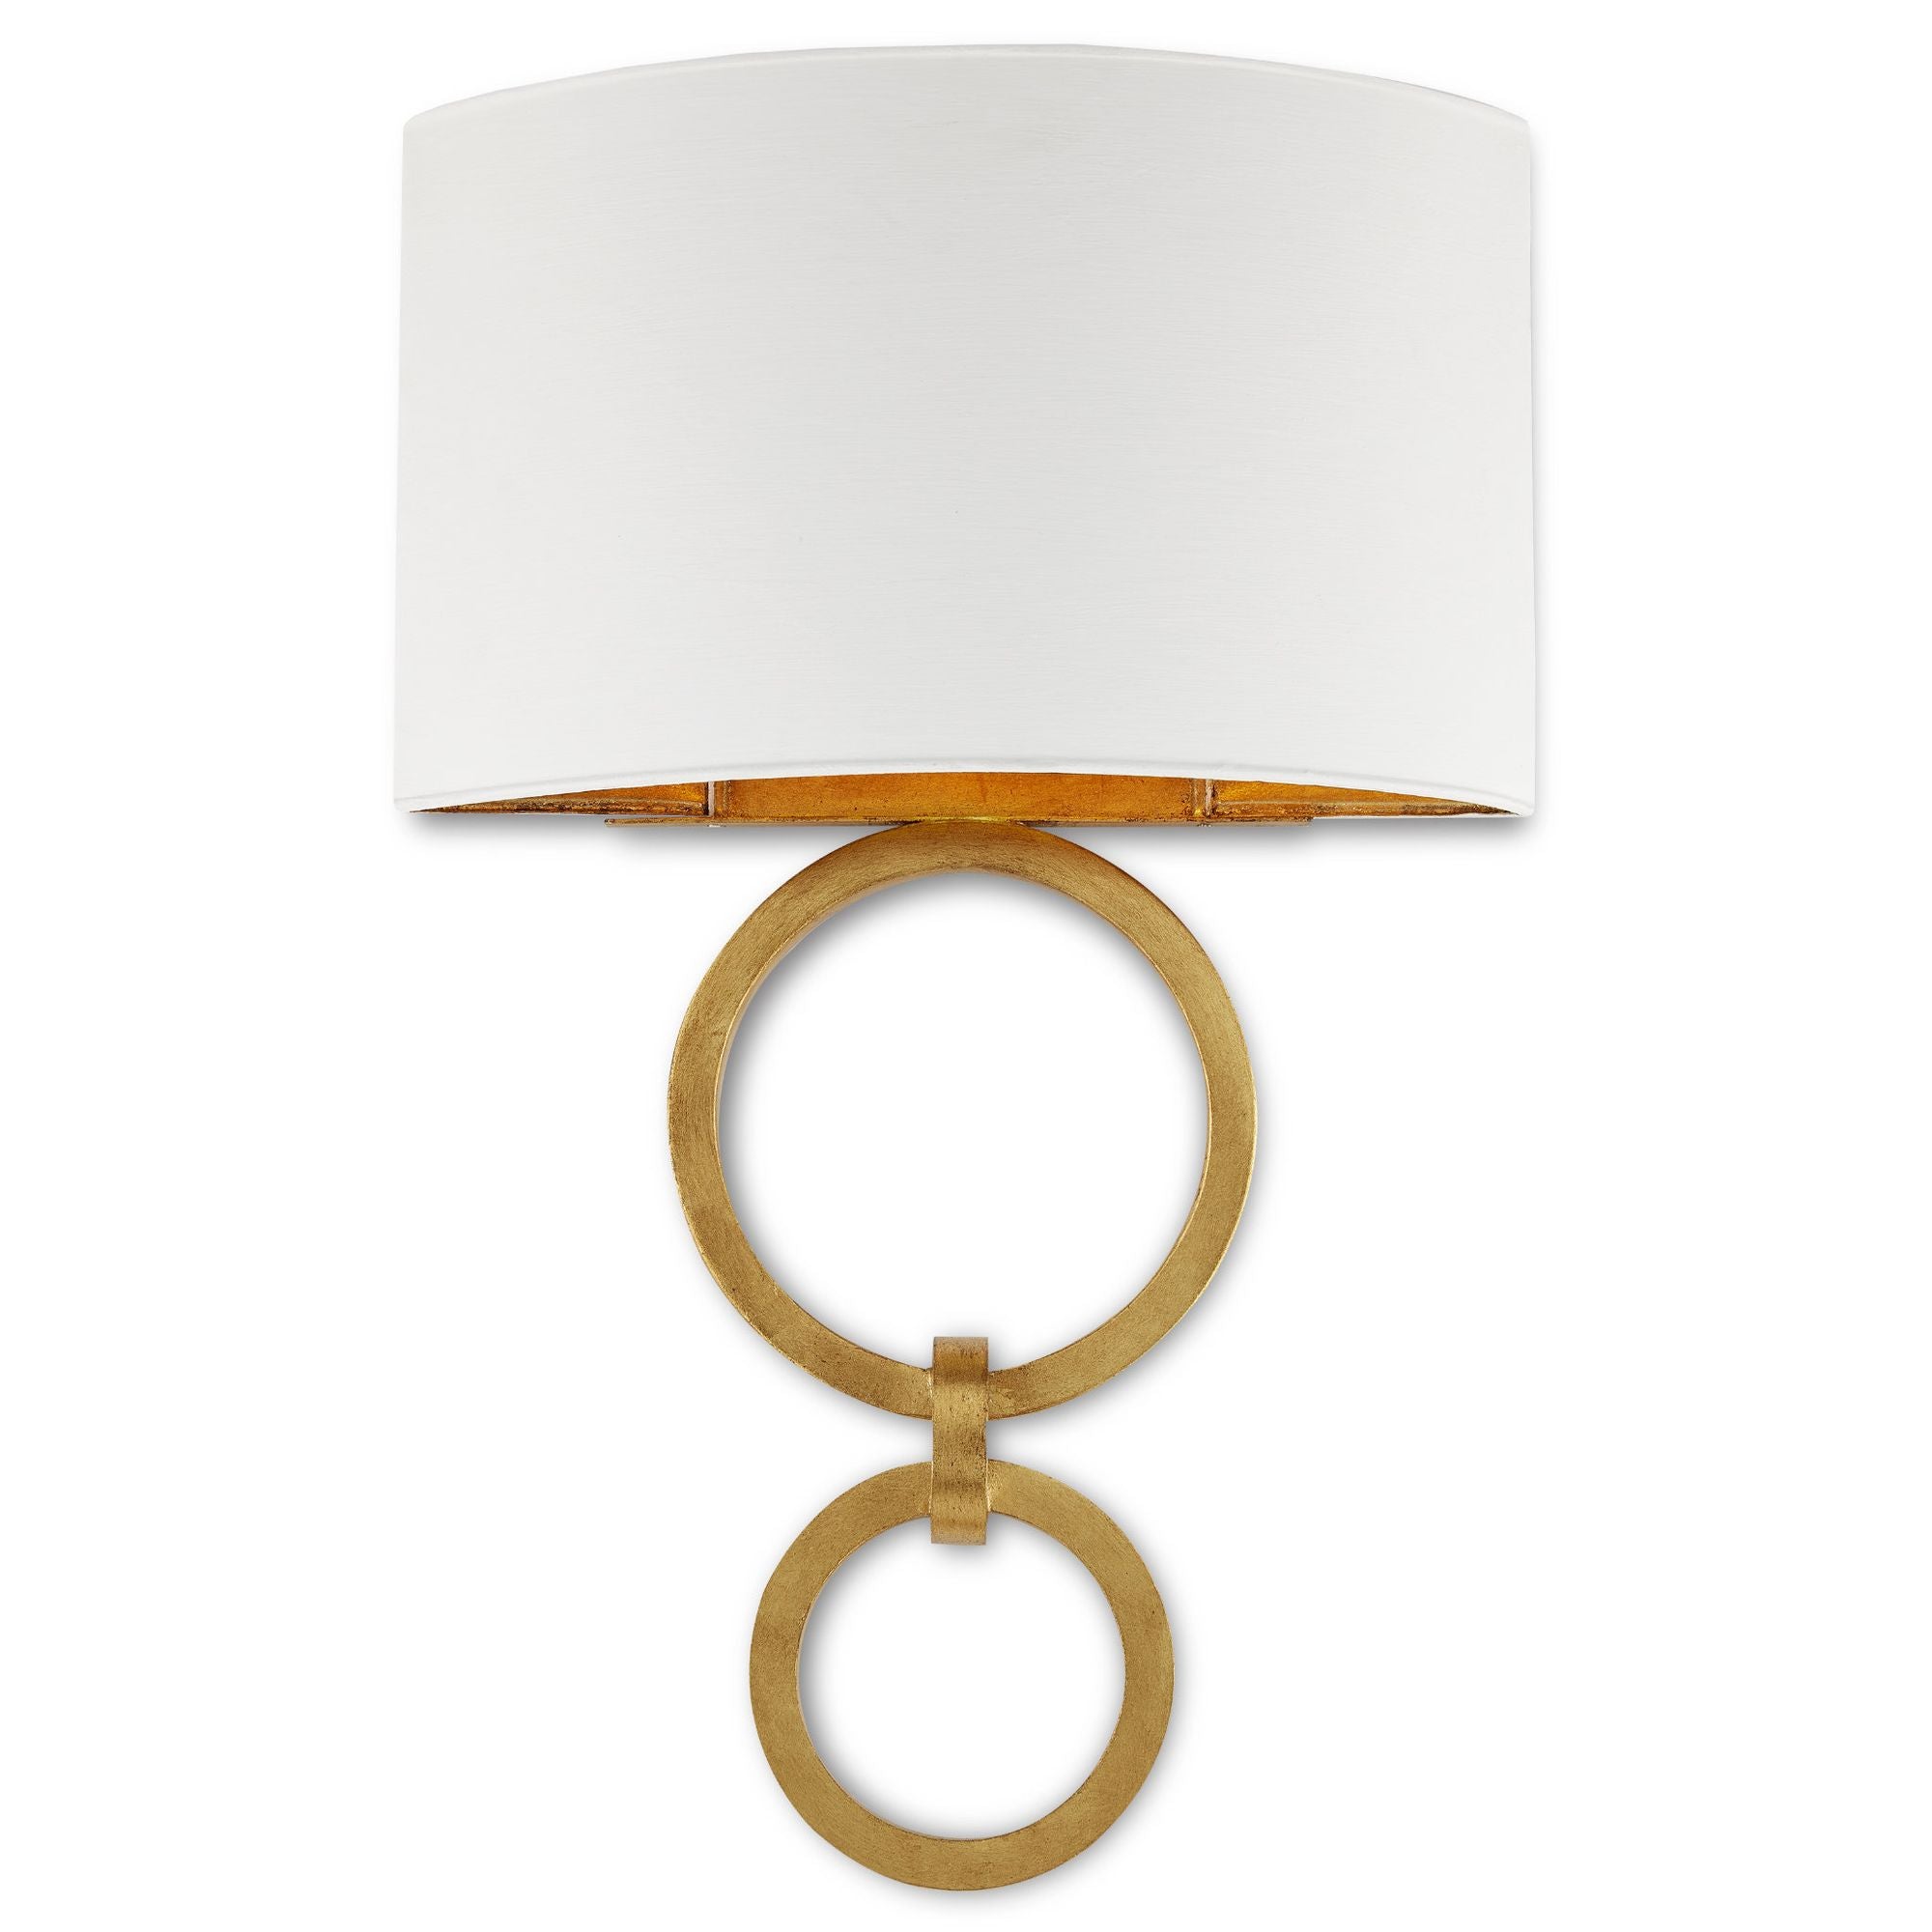 Bolebrook White Wall Sconce, White Shade - Gesso White/Contemporary Gold Leaf